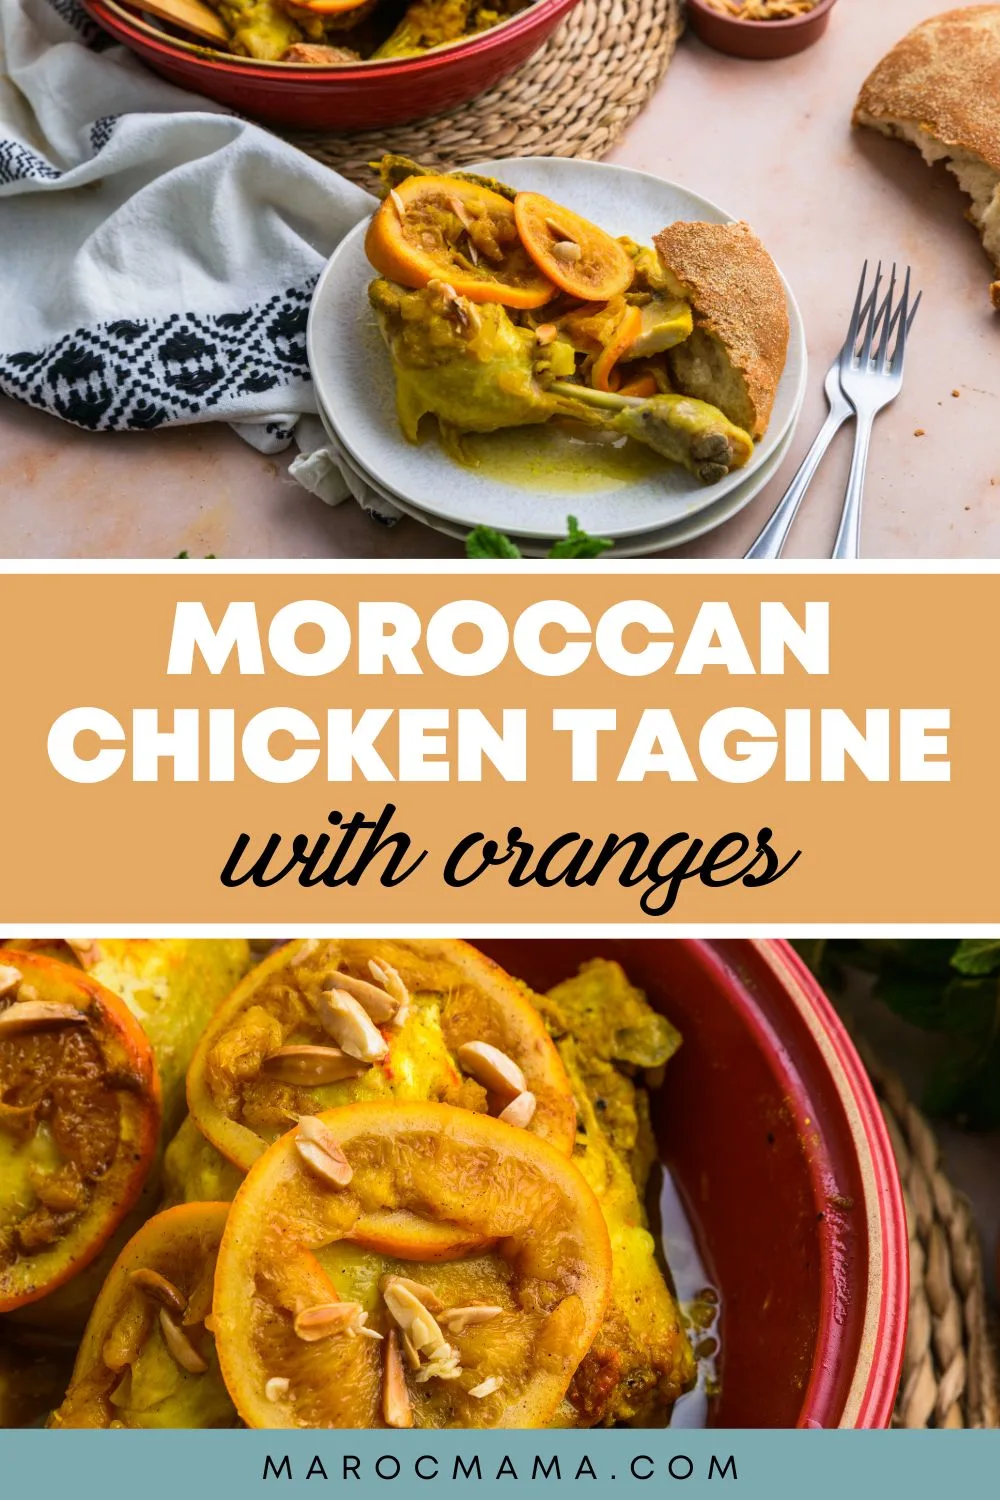 Top image, chicken tajine with oranges and bottom image is of the same dish served in white bowl with the text Moroccan chicken tagine with oranges